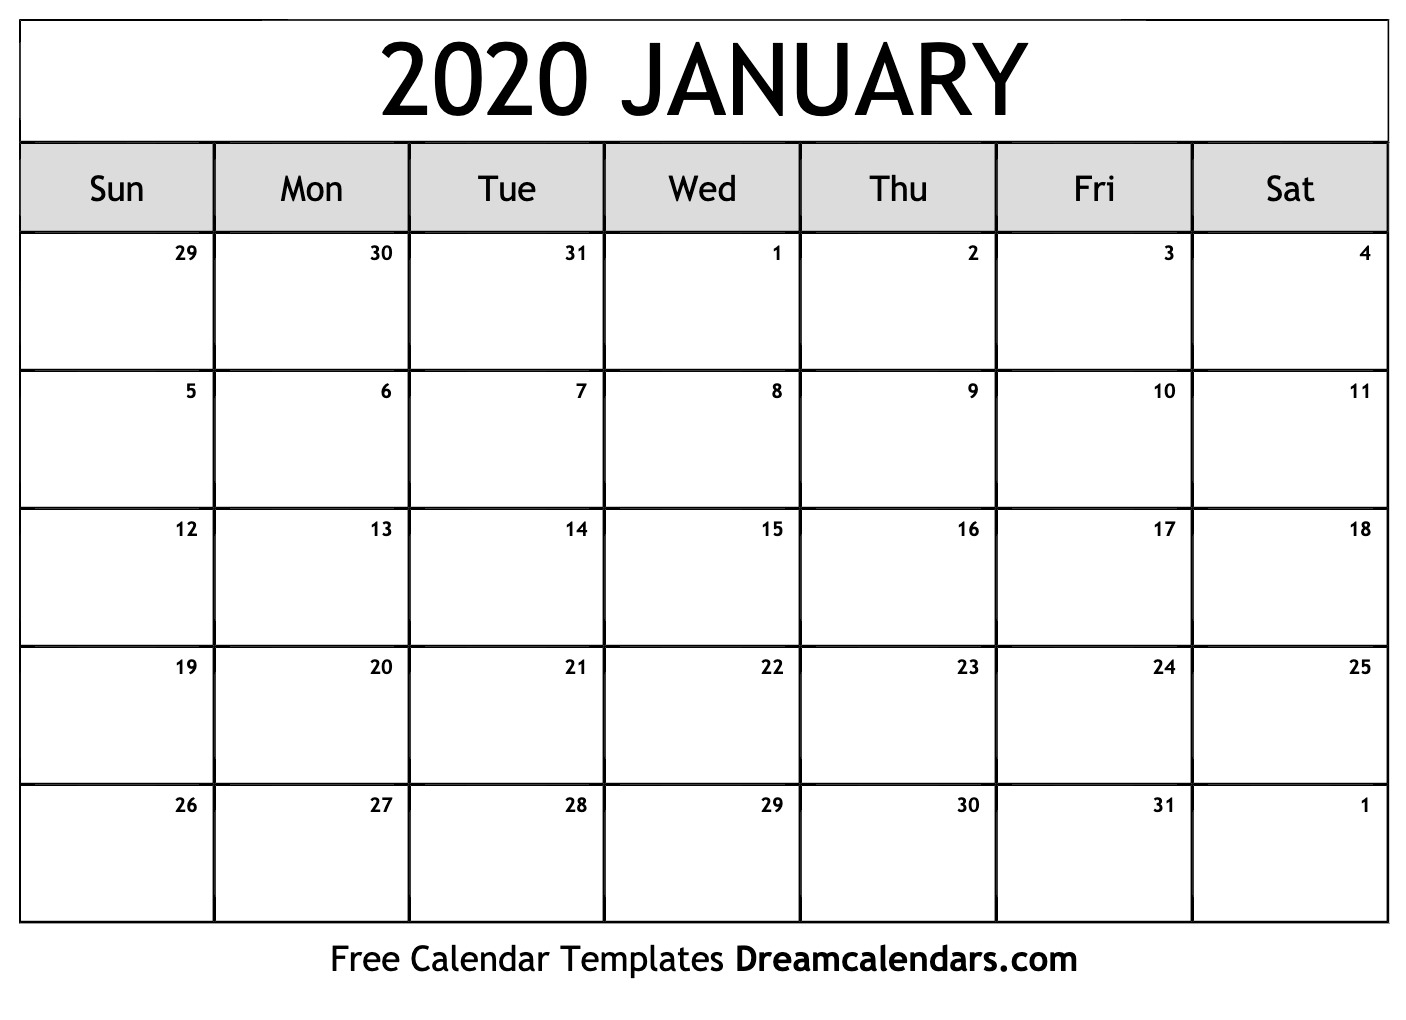 Printable January 2020 Calendar pertaining to 2020 Calendar Printable Free With Added Oicture